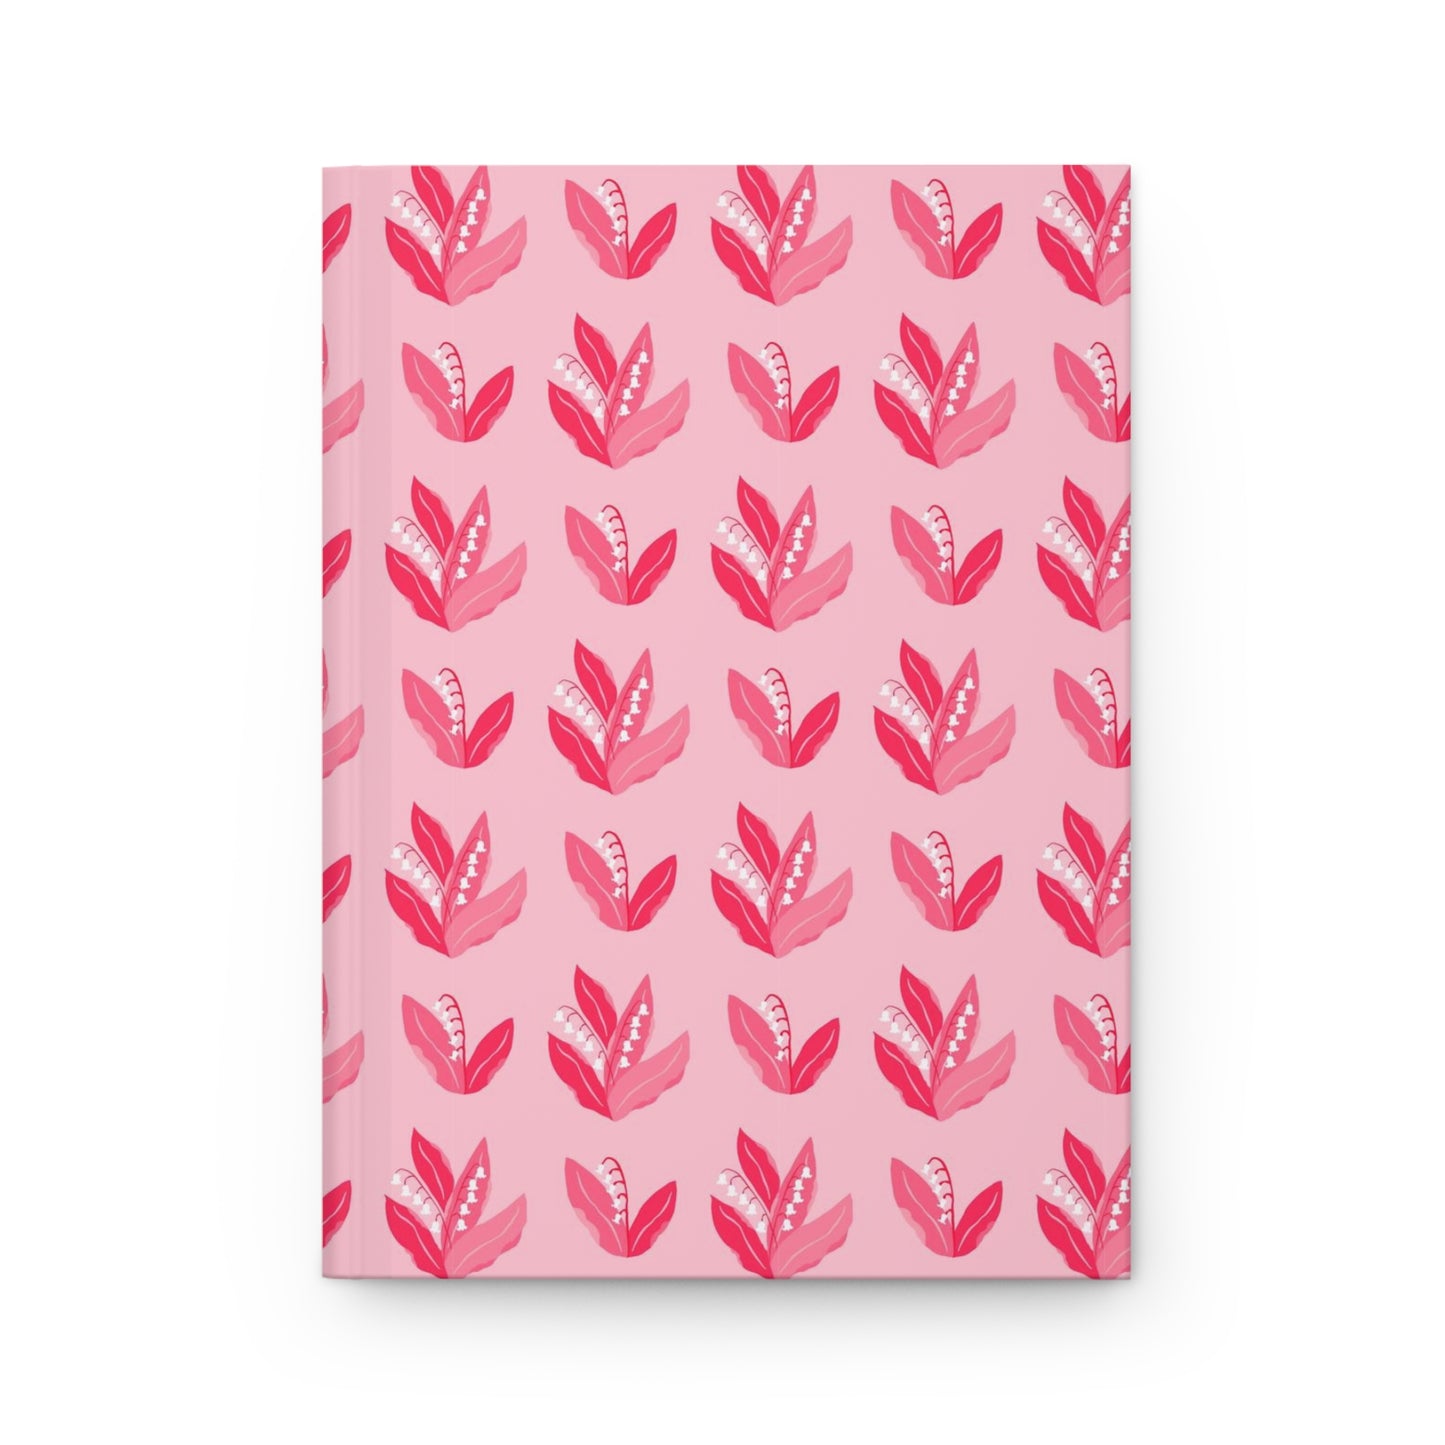 Pink Lily of the Valley Design on Hardcover Journal Matte